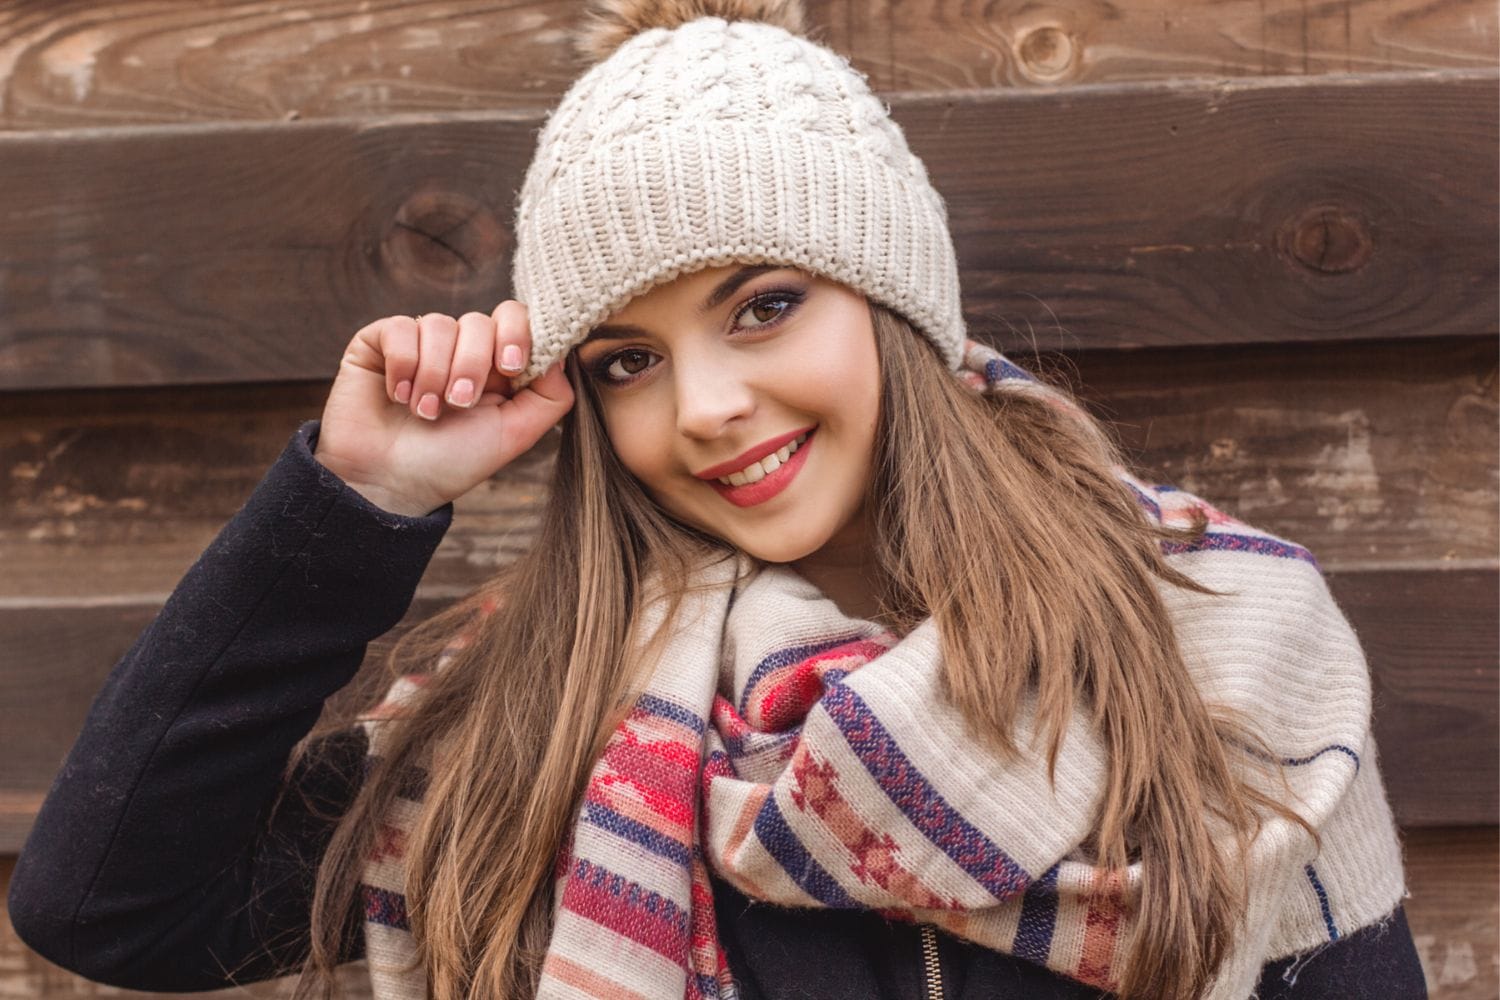 How To Look After Your Hair In Winter